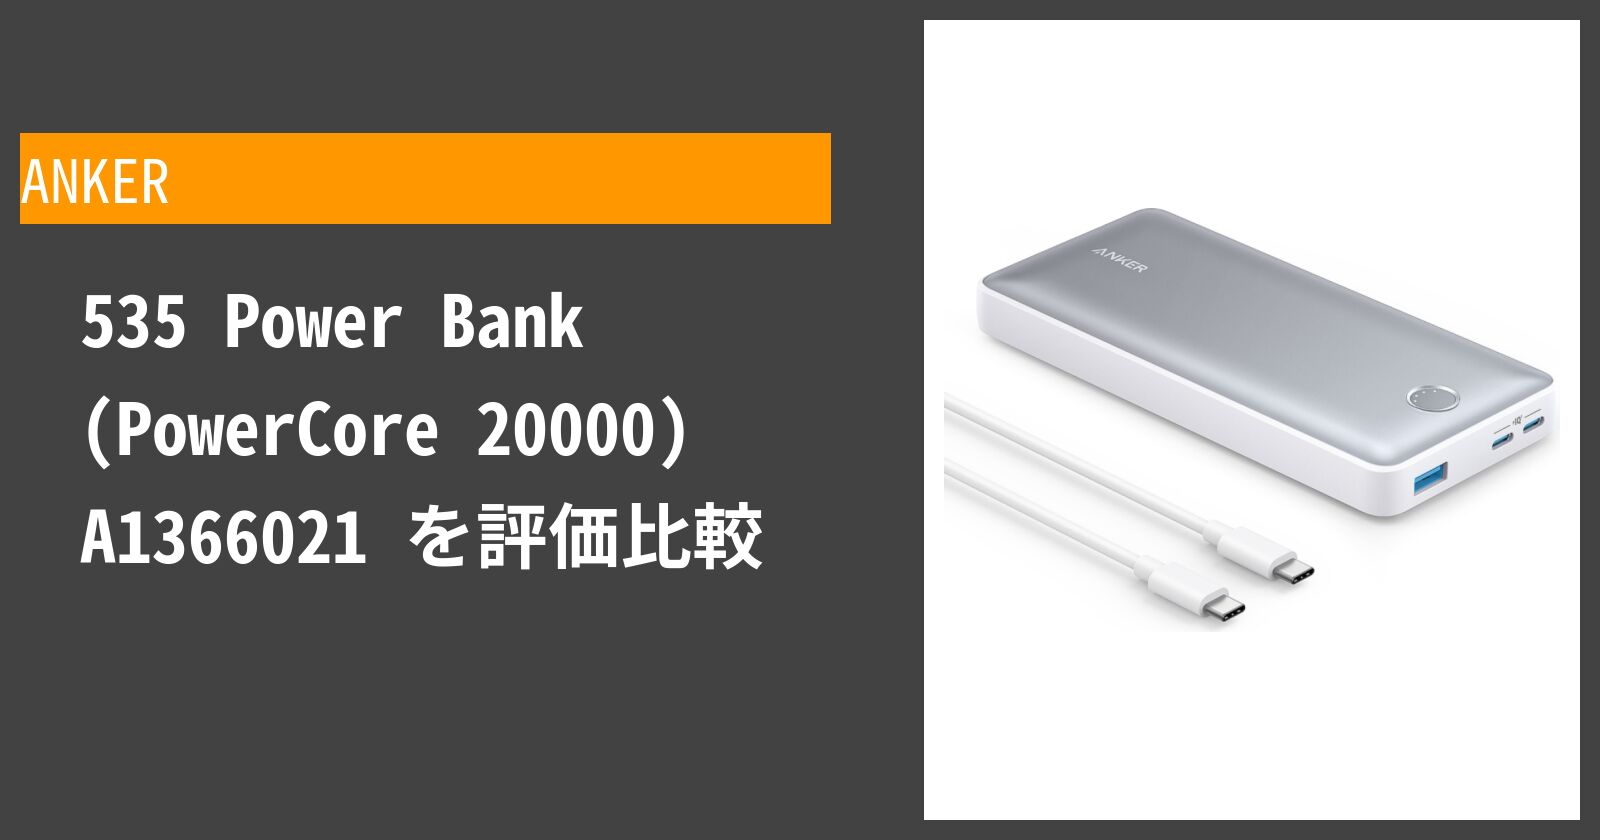  535 Power Bank (PowerCore 20000) A1366021 を徹底評価